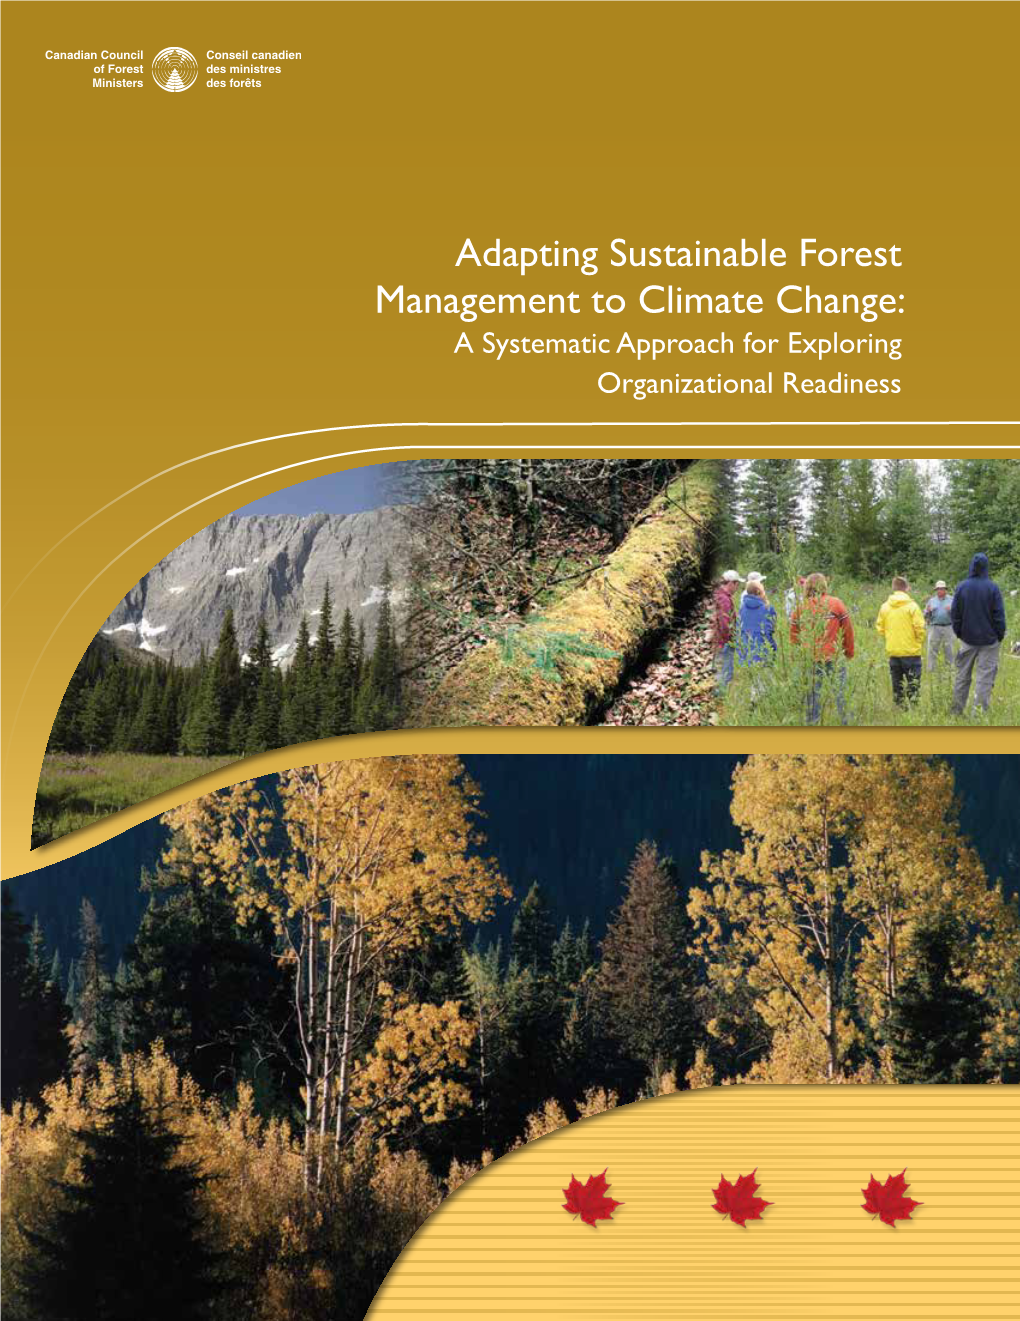 Adapting Sustainable Forest Management to Climate Change: A